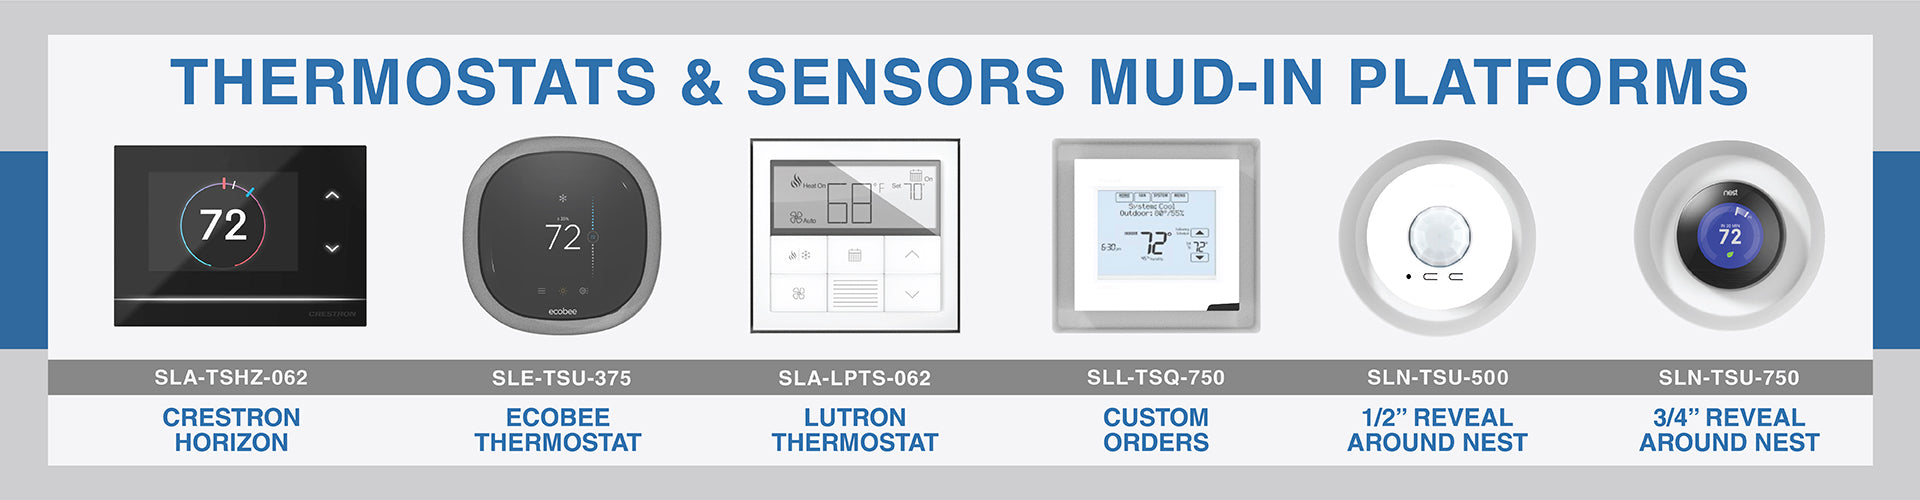 SeeLess thermostat and sensors mud-in mounts